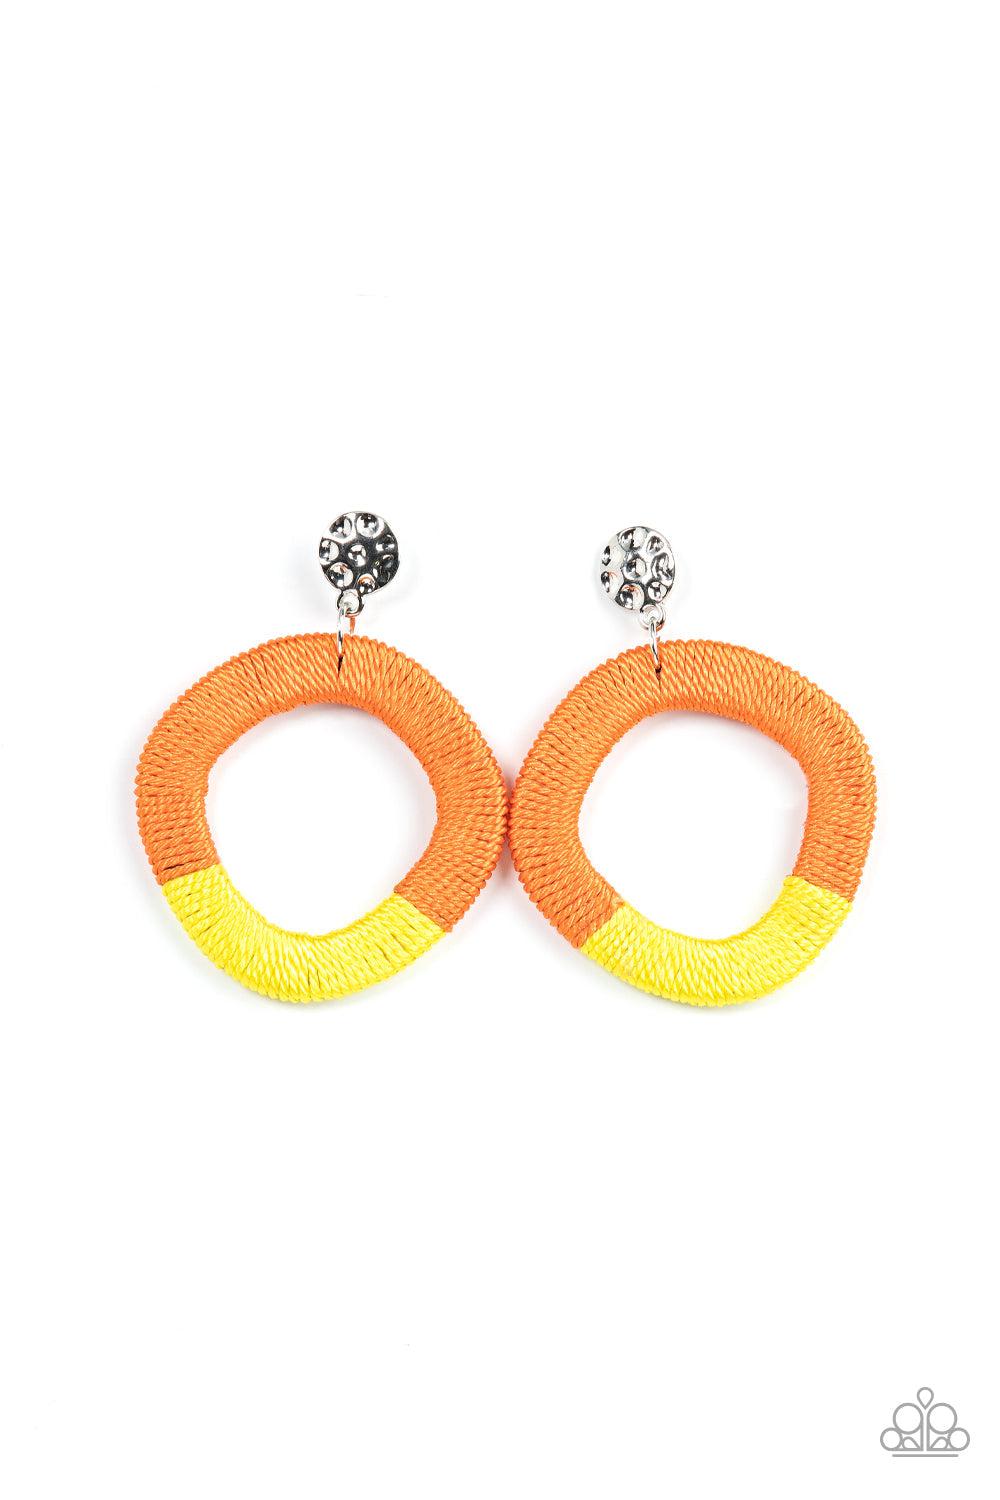 Thats a WRAPAROUND Multi Orange & Yellow Earrings - Paparazzi Accessories- lightbox - CarasShop.com - $5 Jewelry by Cara Jewels